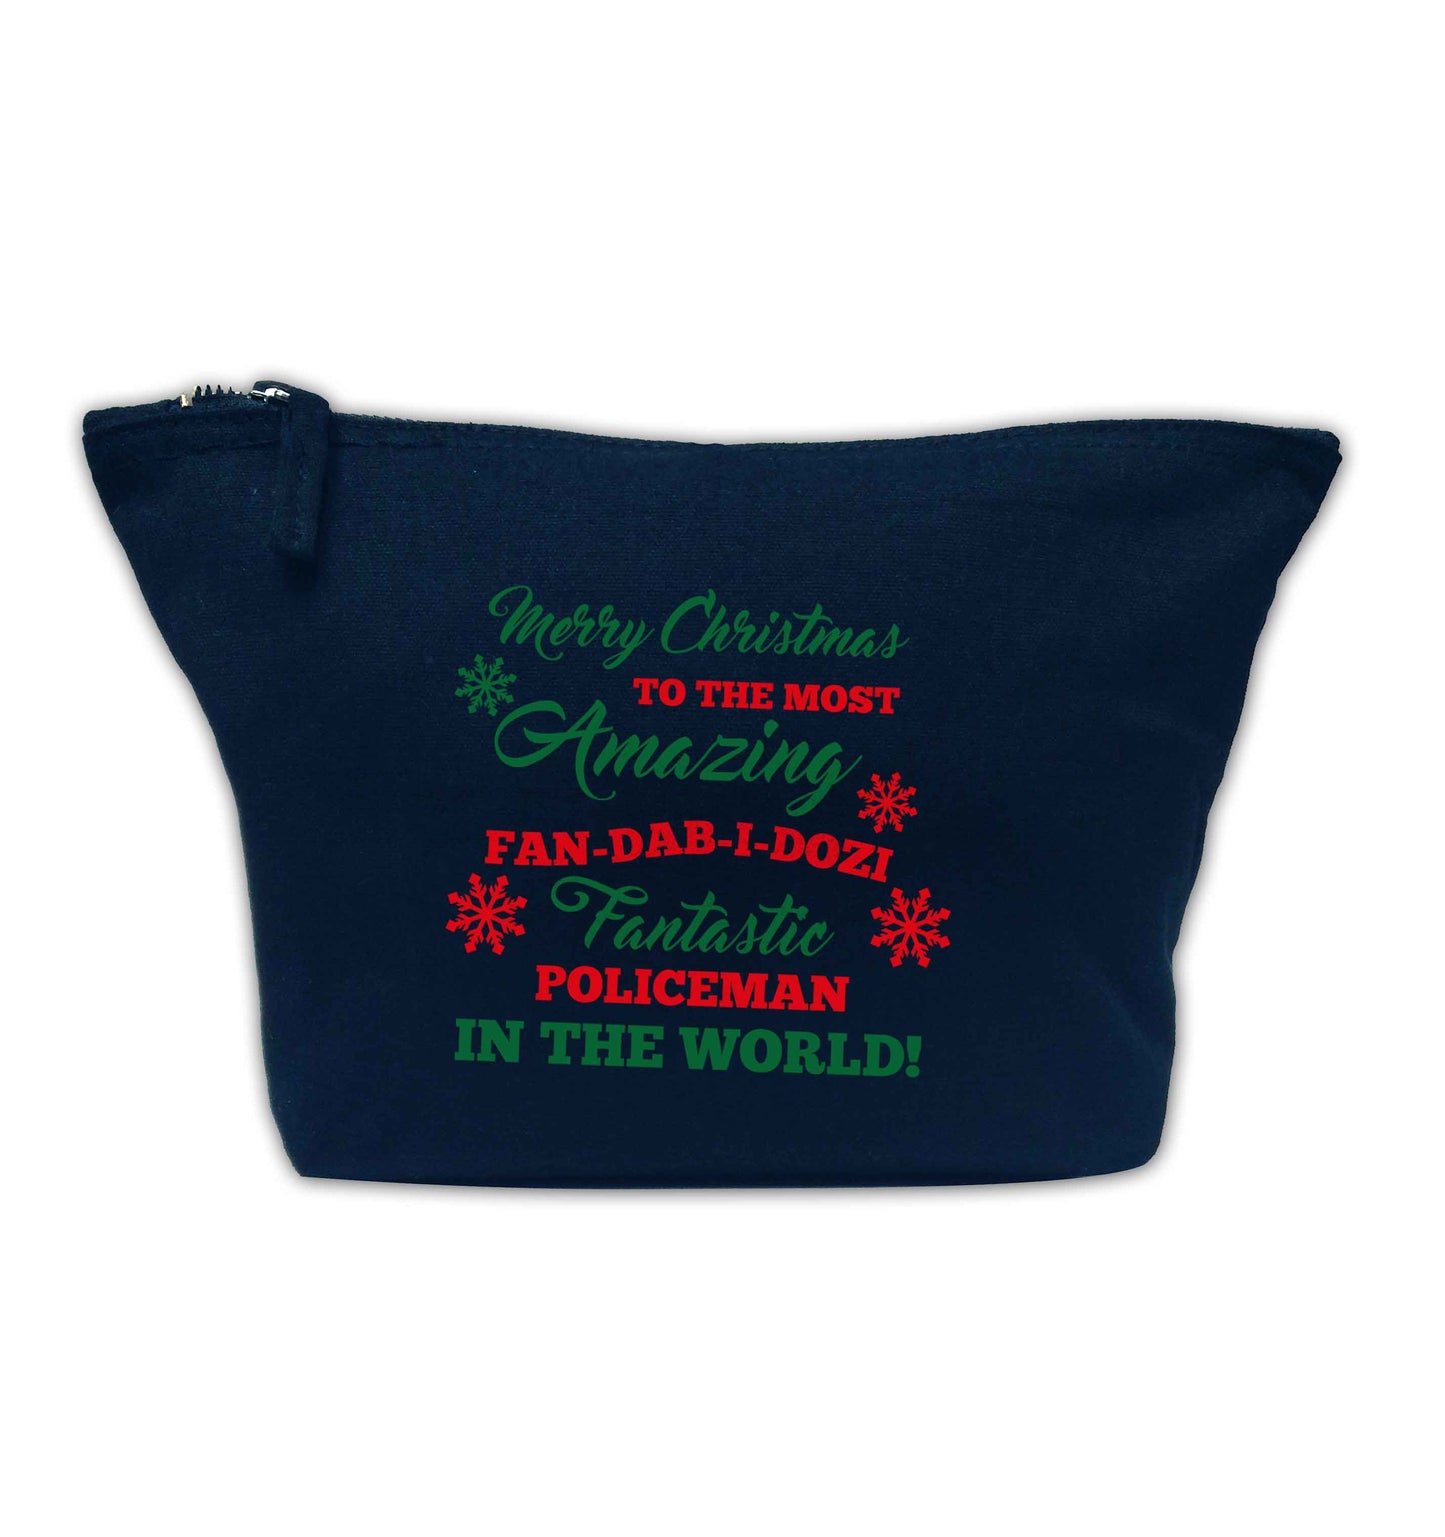 Merry Christmas to the most amazing policeman in the world! navy makeup bag